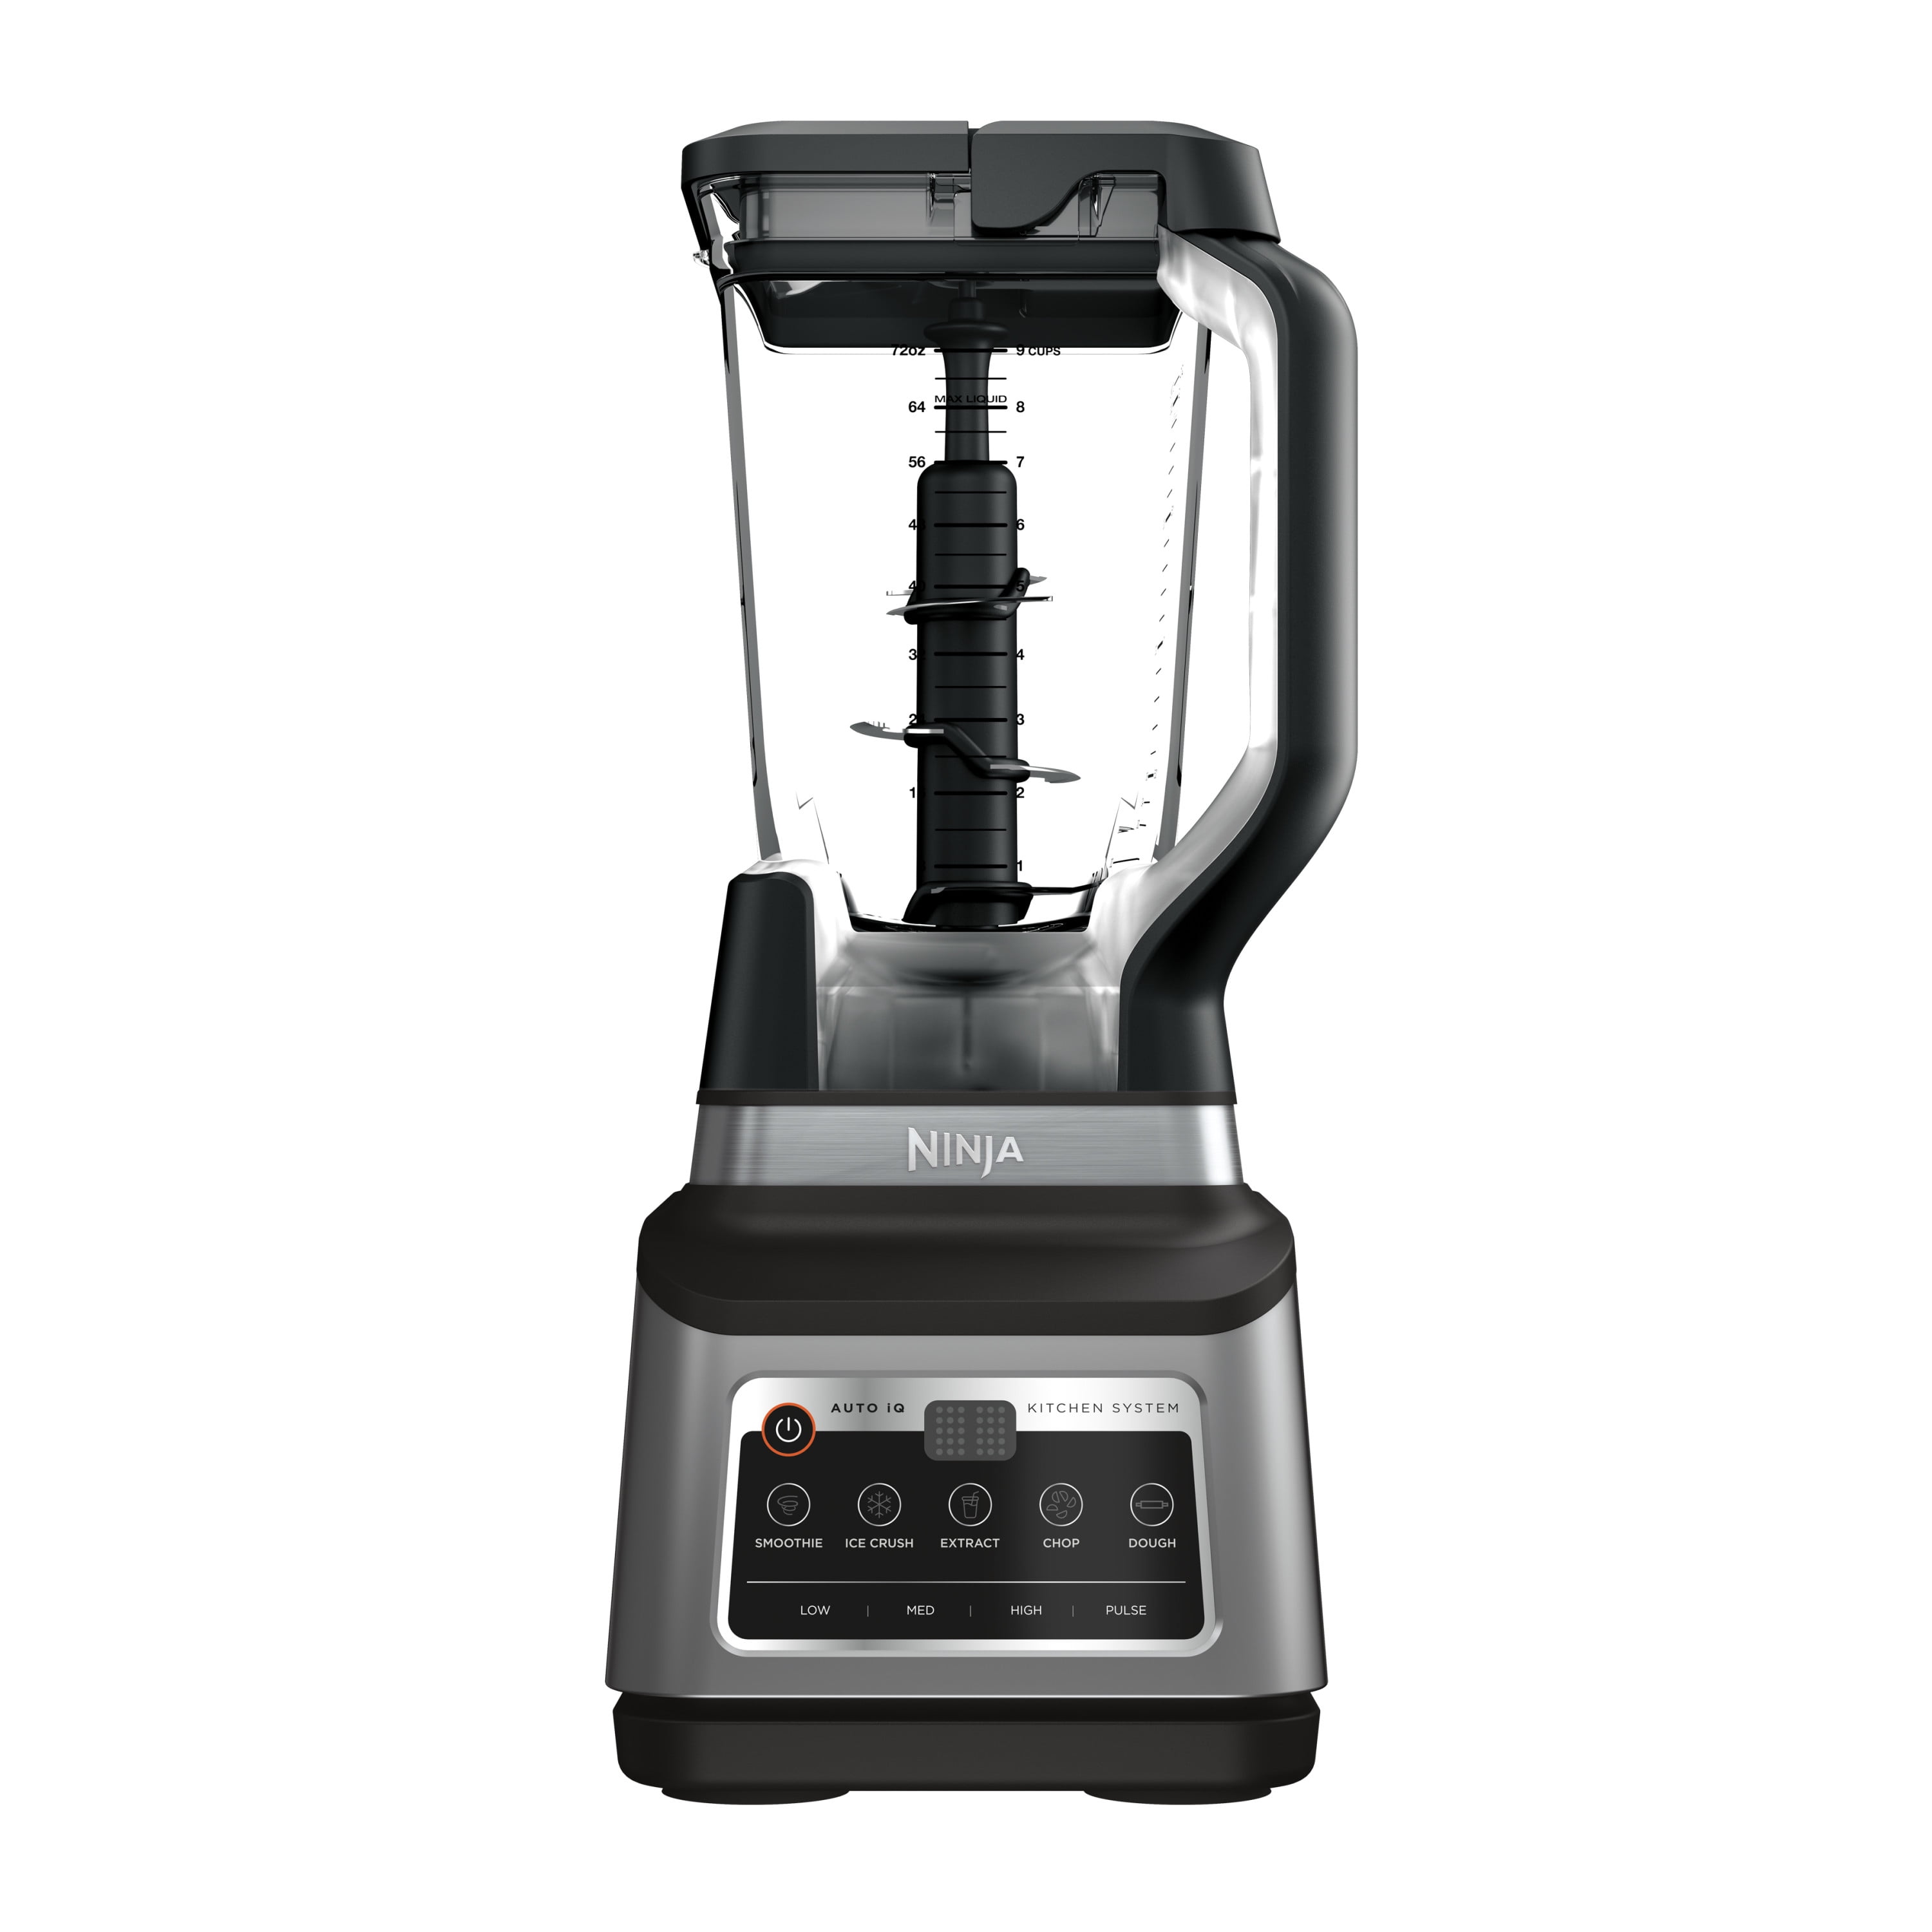 Ninja Professional Plus Kitchen System with Auto-IQ review